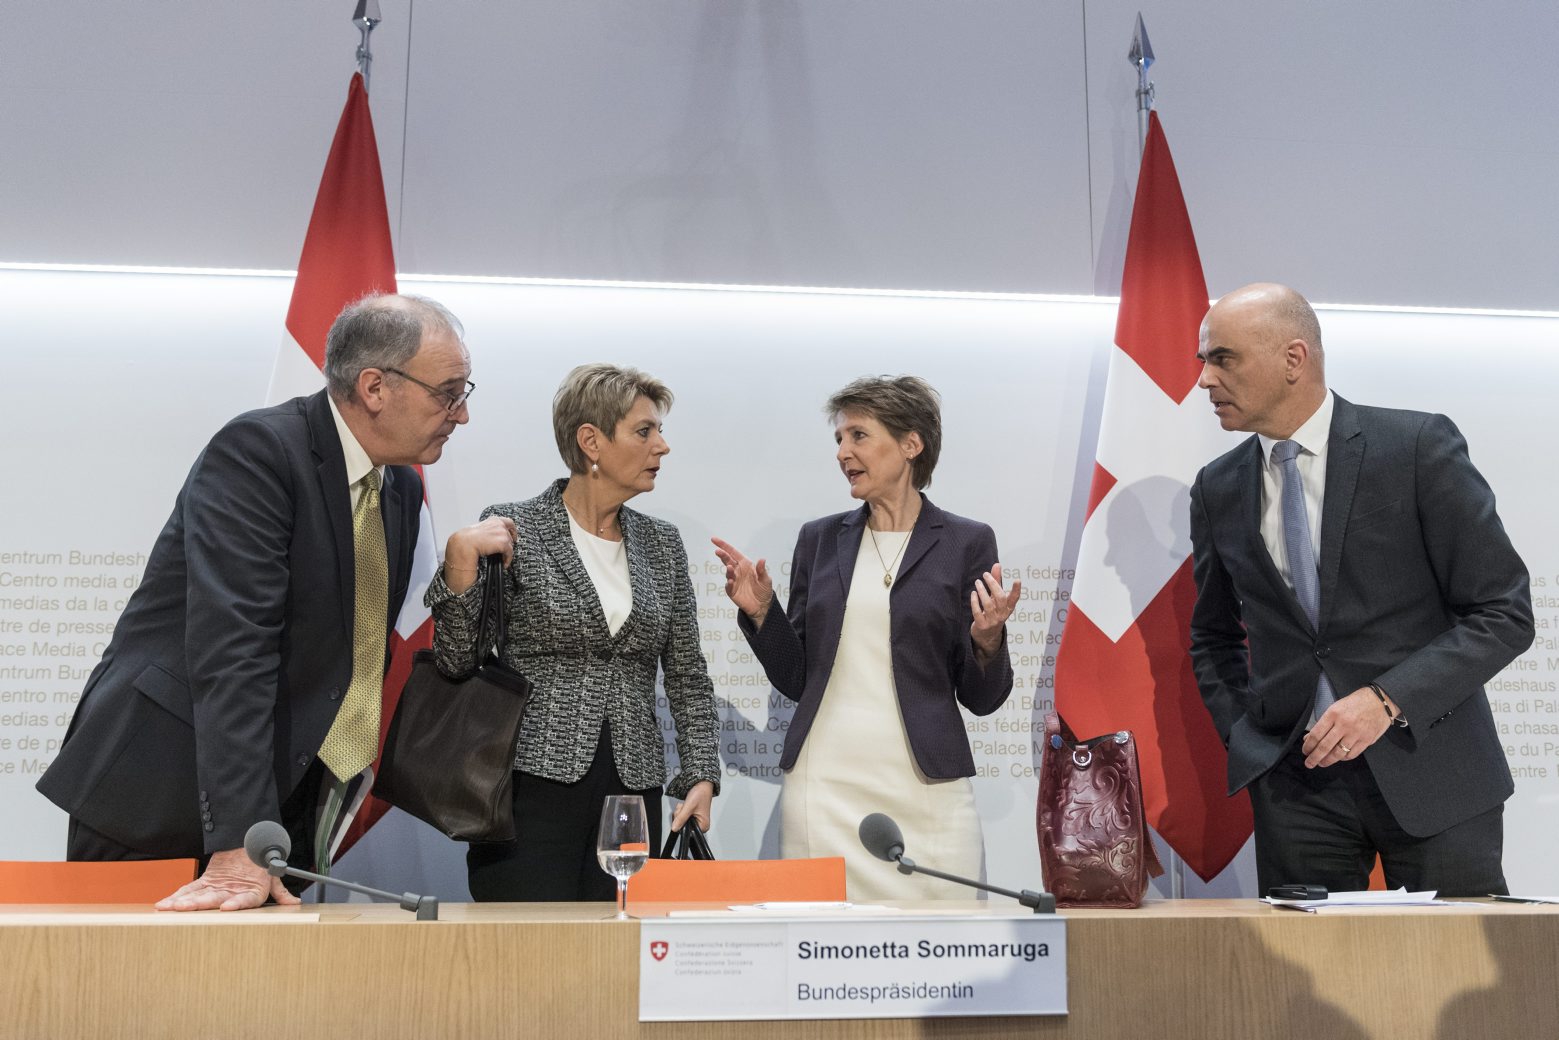 Swiss Federal president Simonetta Sommaruga, second right, and from left, Federal councillors Guy Parmelin, Karin Keller-Sutter and Alain Berset talk after the media briefing about the latest measures to fight the Covid-19 Coronavirus pandemic, on Friday, March 13, 2020 in Bern, Switzerland. (KEYSTONE/Alessandro della Valle) SWITZERLAND GOVERNMENT CORONAVIRUS